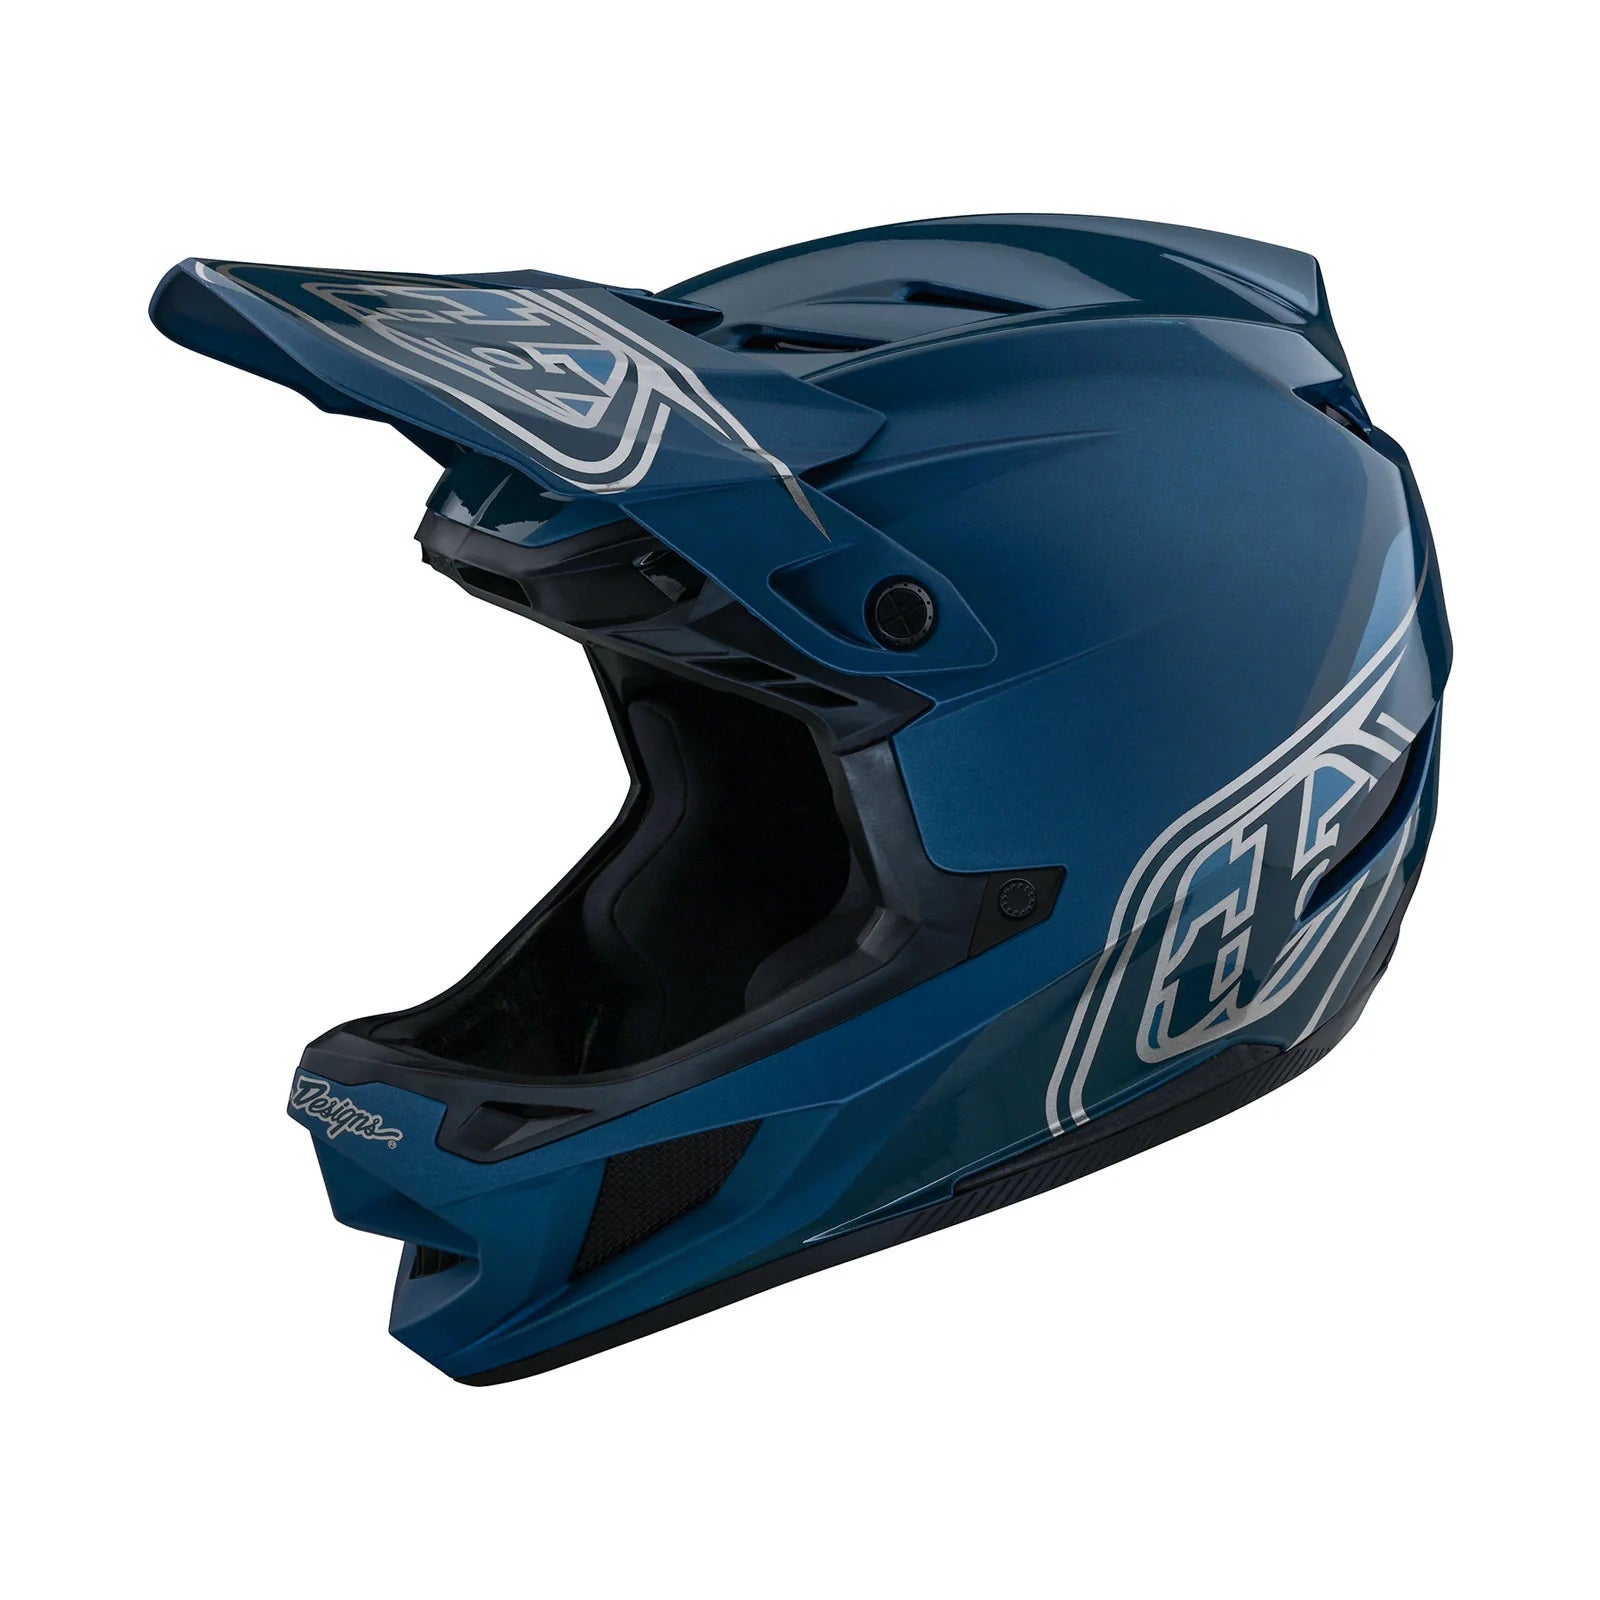 The TLD D4 AS Polyacrylite Helmet W/MIPS Shadow Blue is shown on a white background.